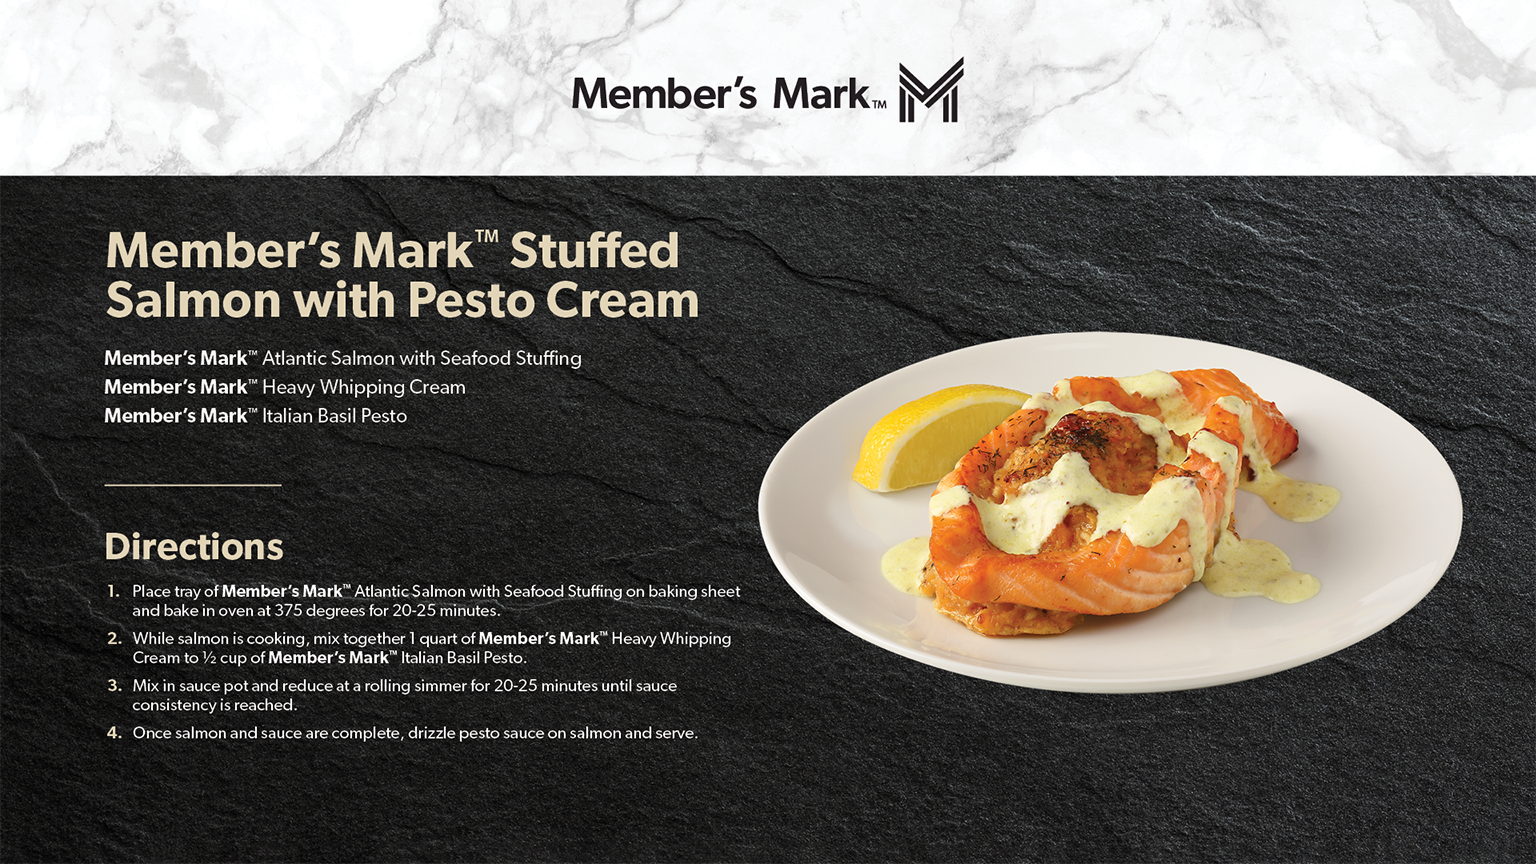 Ingredients and recipe for Member’s Mark Stuffed Salmon with Pesto Cream.